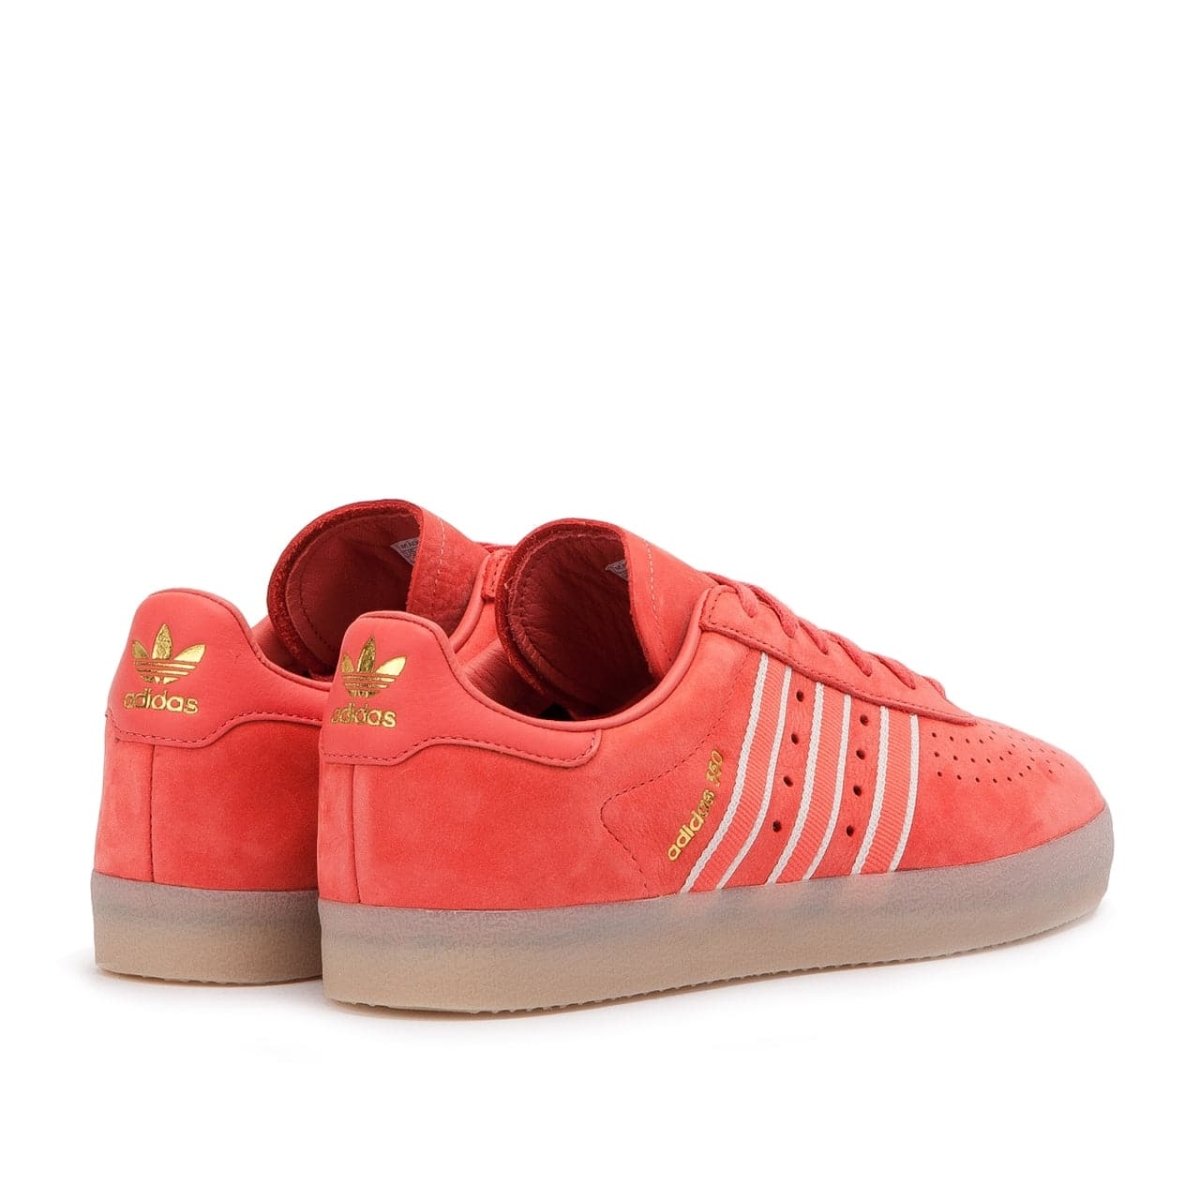 adidas x Oyster 350 (Red / Clear White Gold Metallic) DB1975 – Allike Store